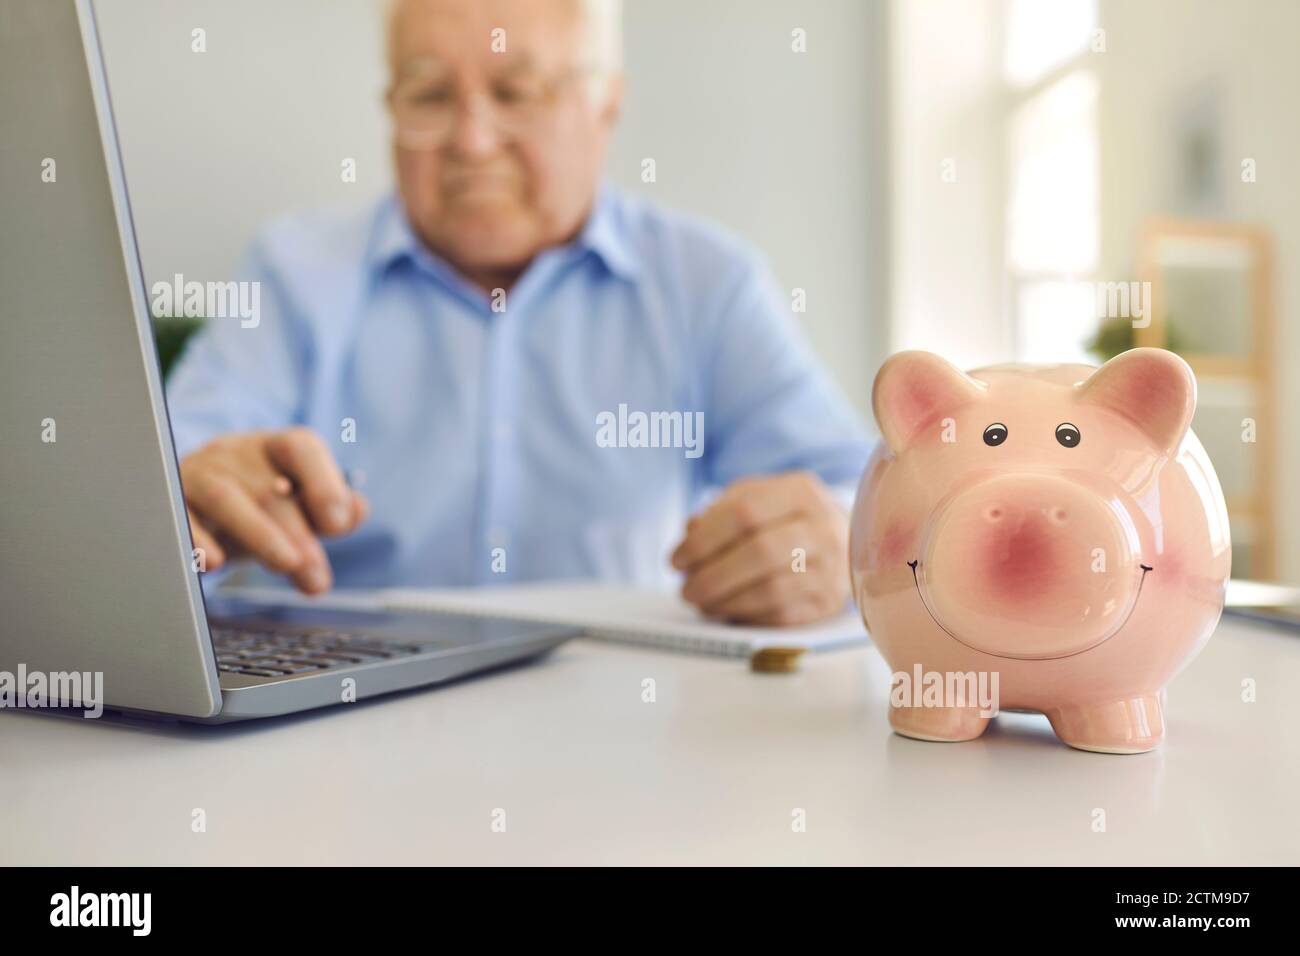 Piggy bank standing on desk with blurred senior man using laptop to pay bills online in background Stock Photo